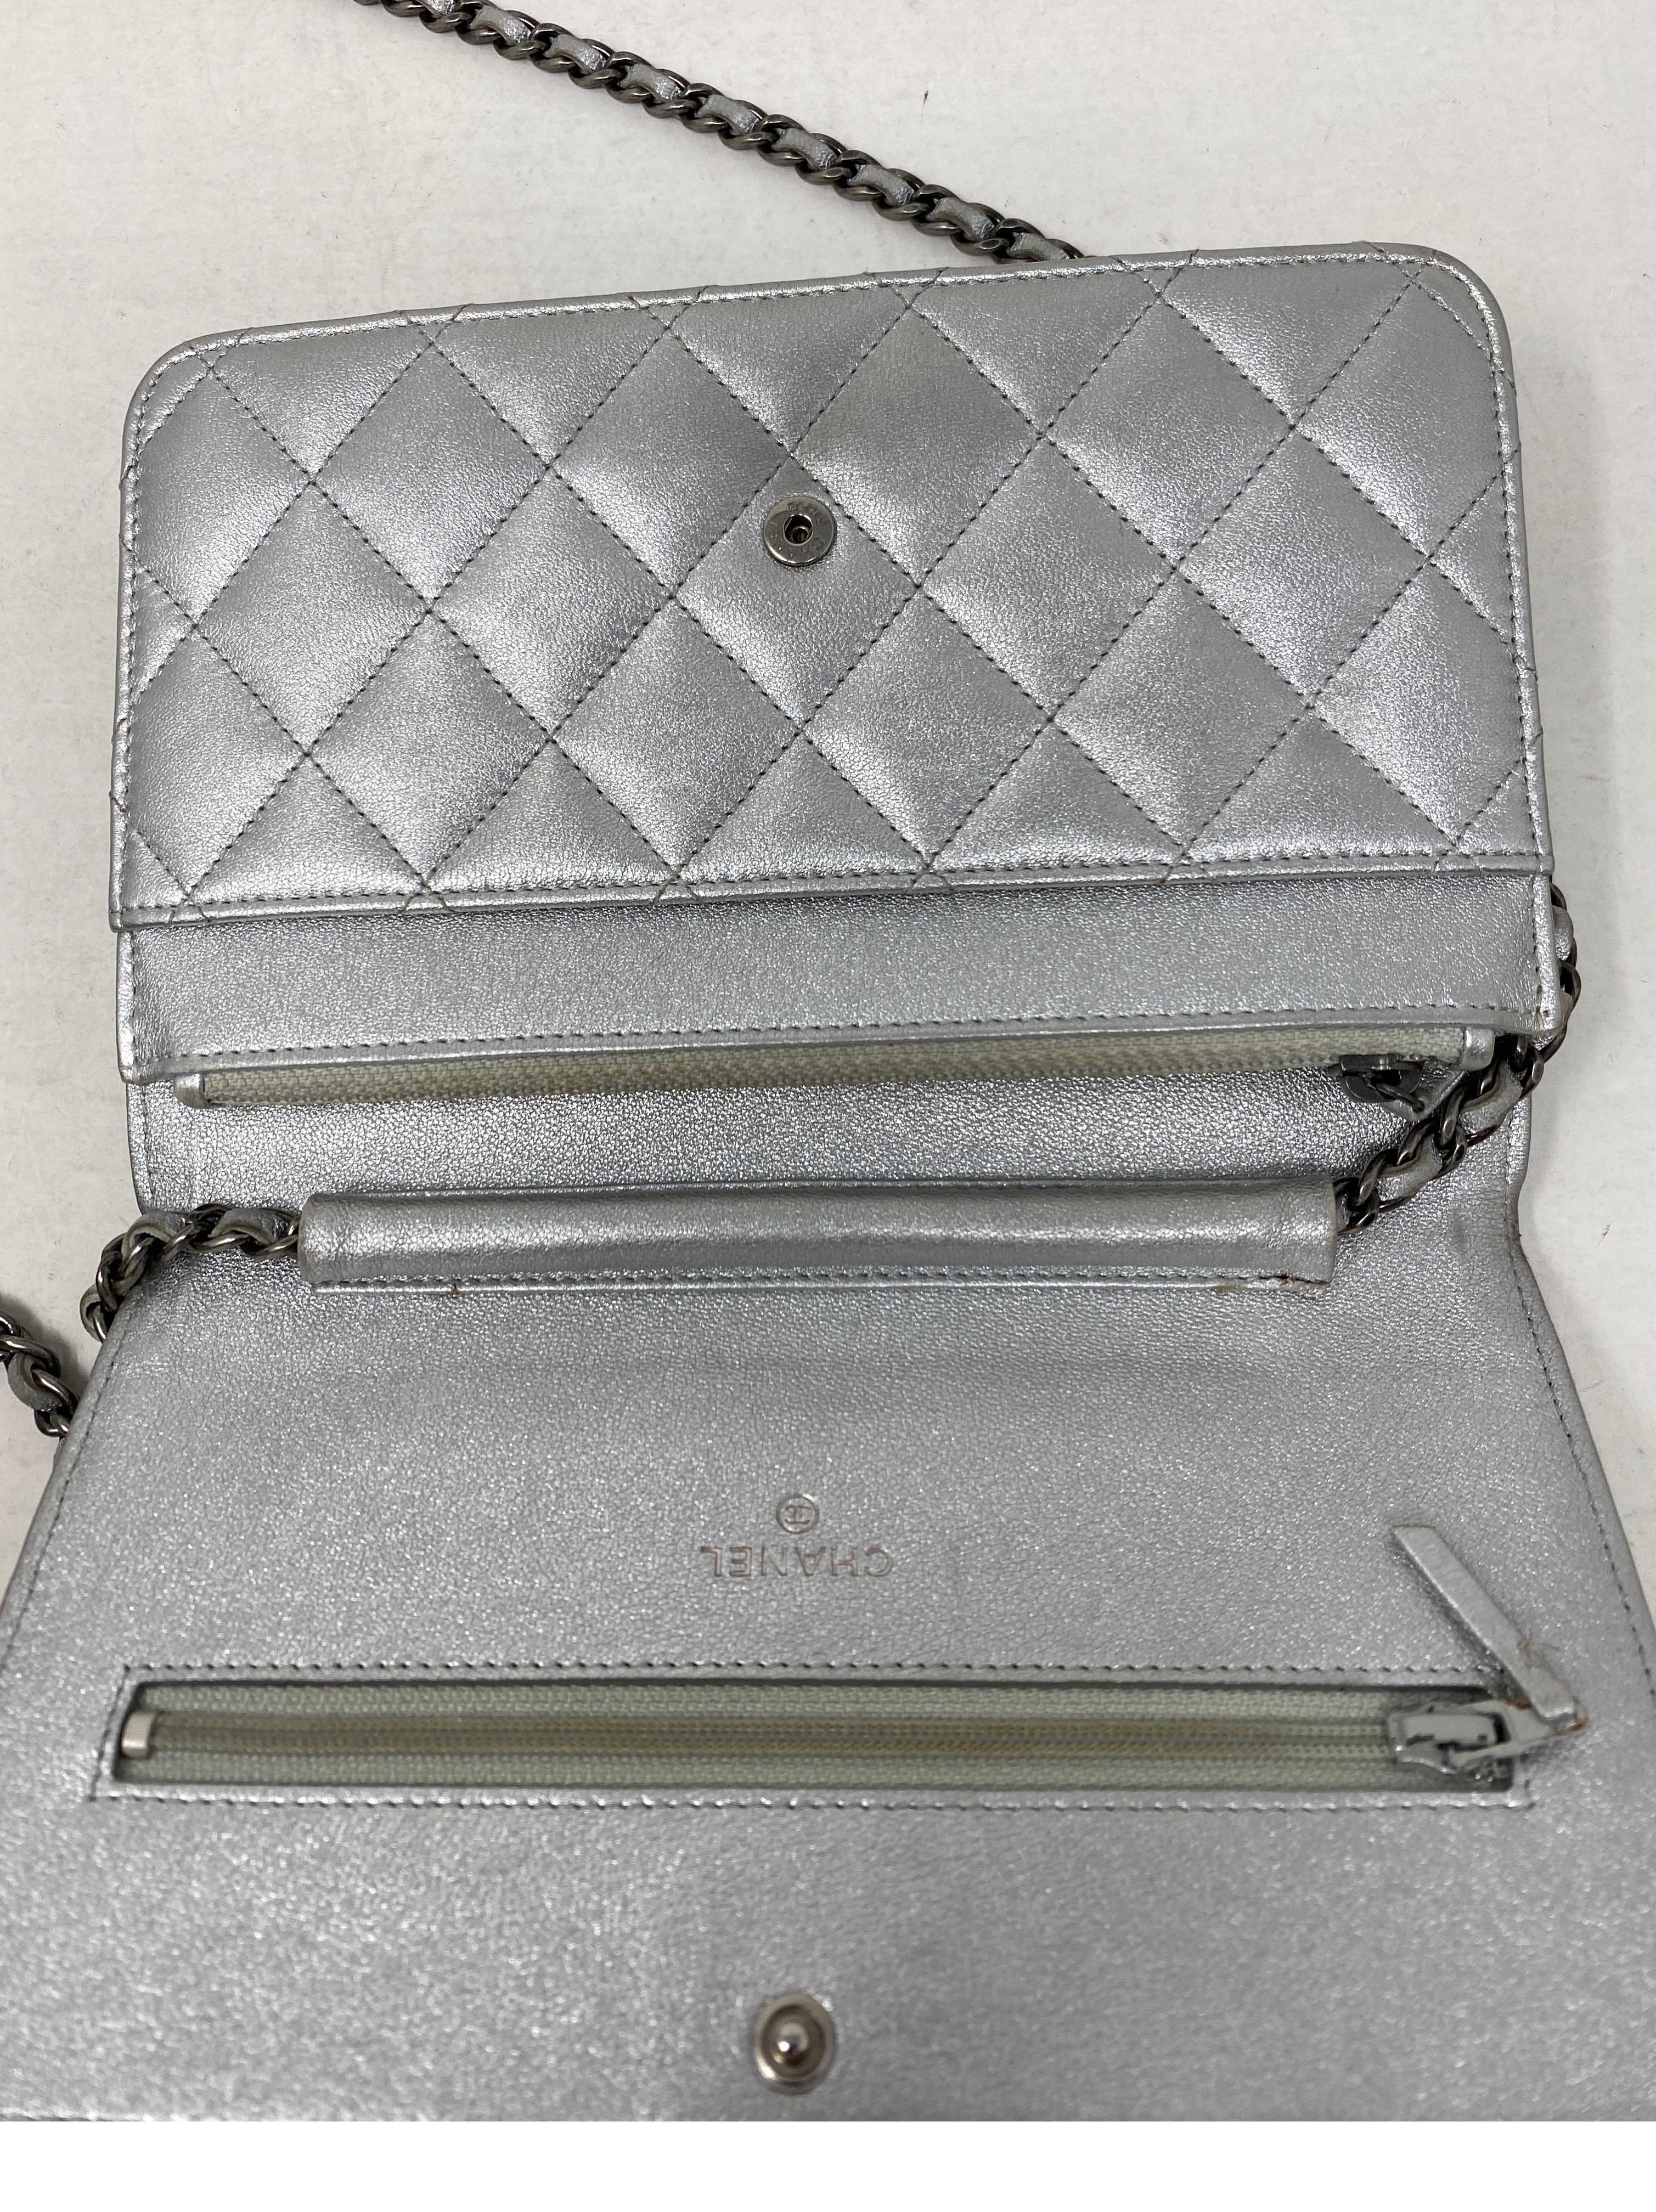 Chanel Silver Reissue Wallet On A Chain Bag 2